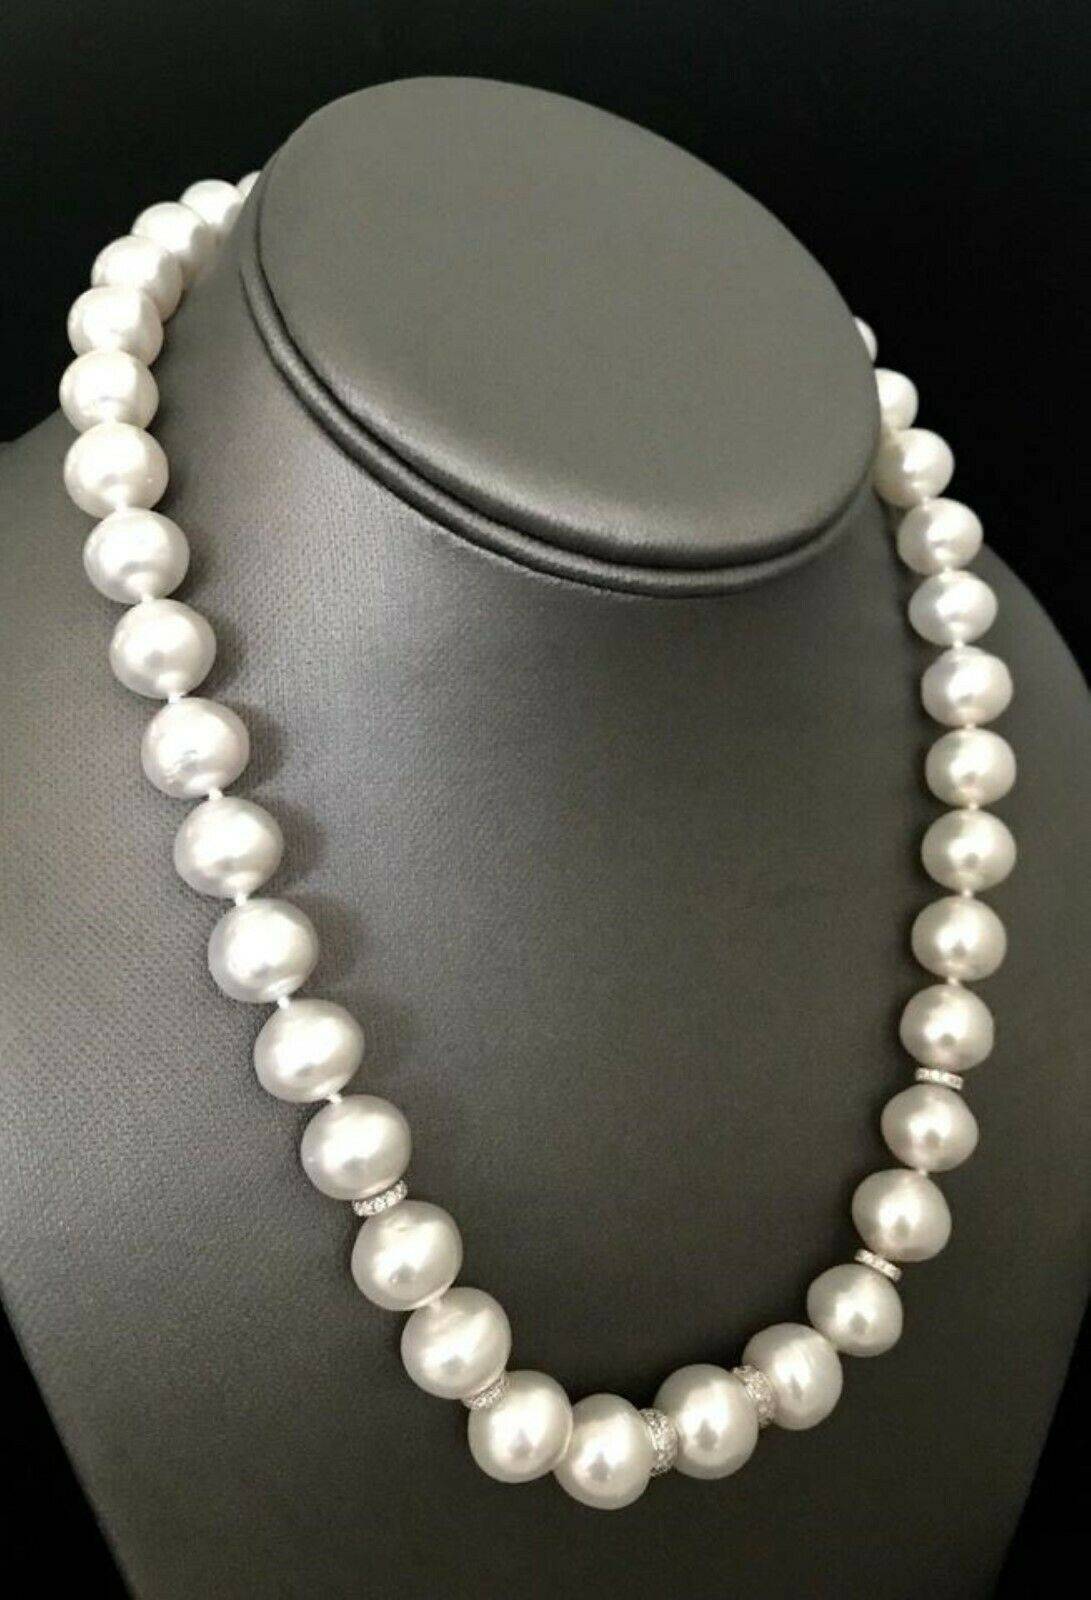 Diamond South Sea Pearl Necklace 14k Gold 13 mm 18.2" Certified $15,450 817025 - Certified Estate Jewelry